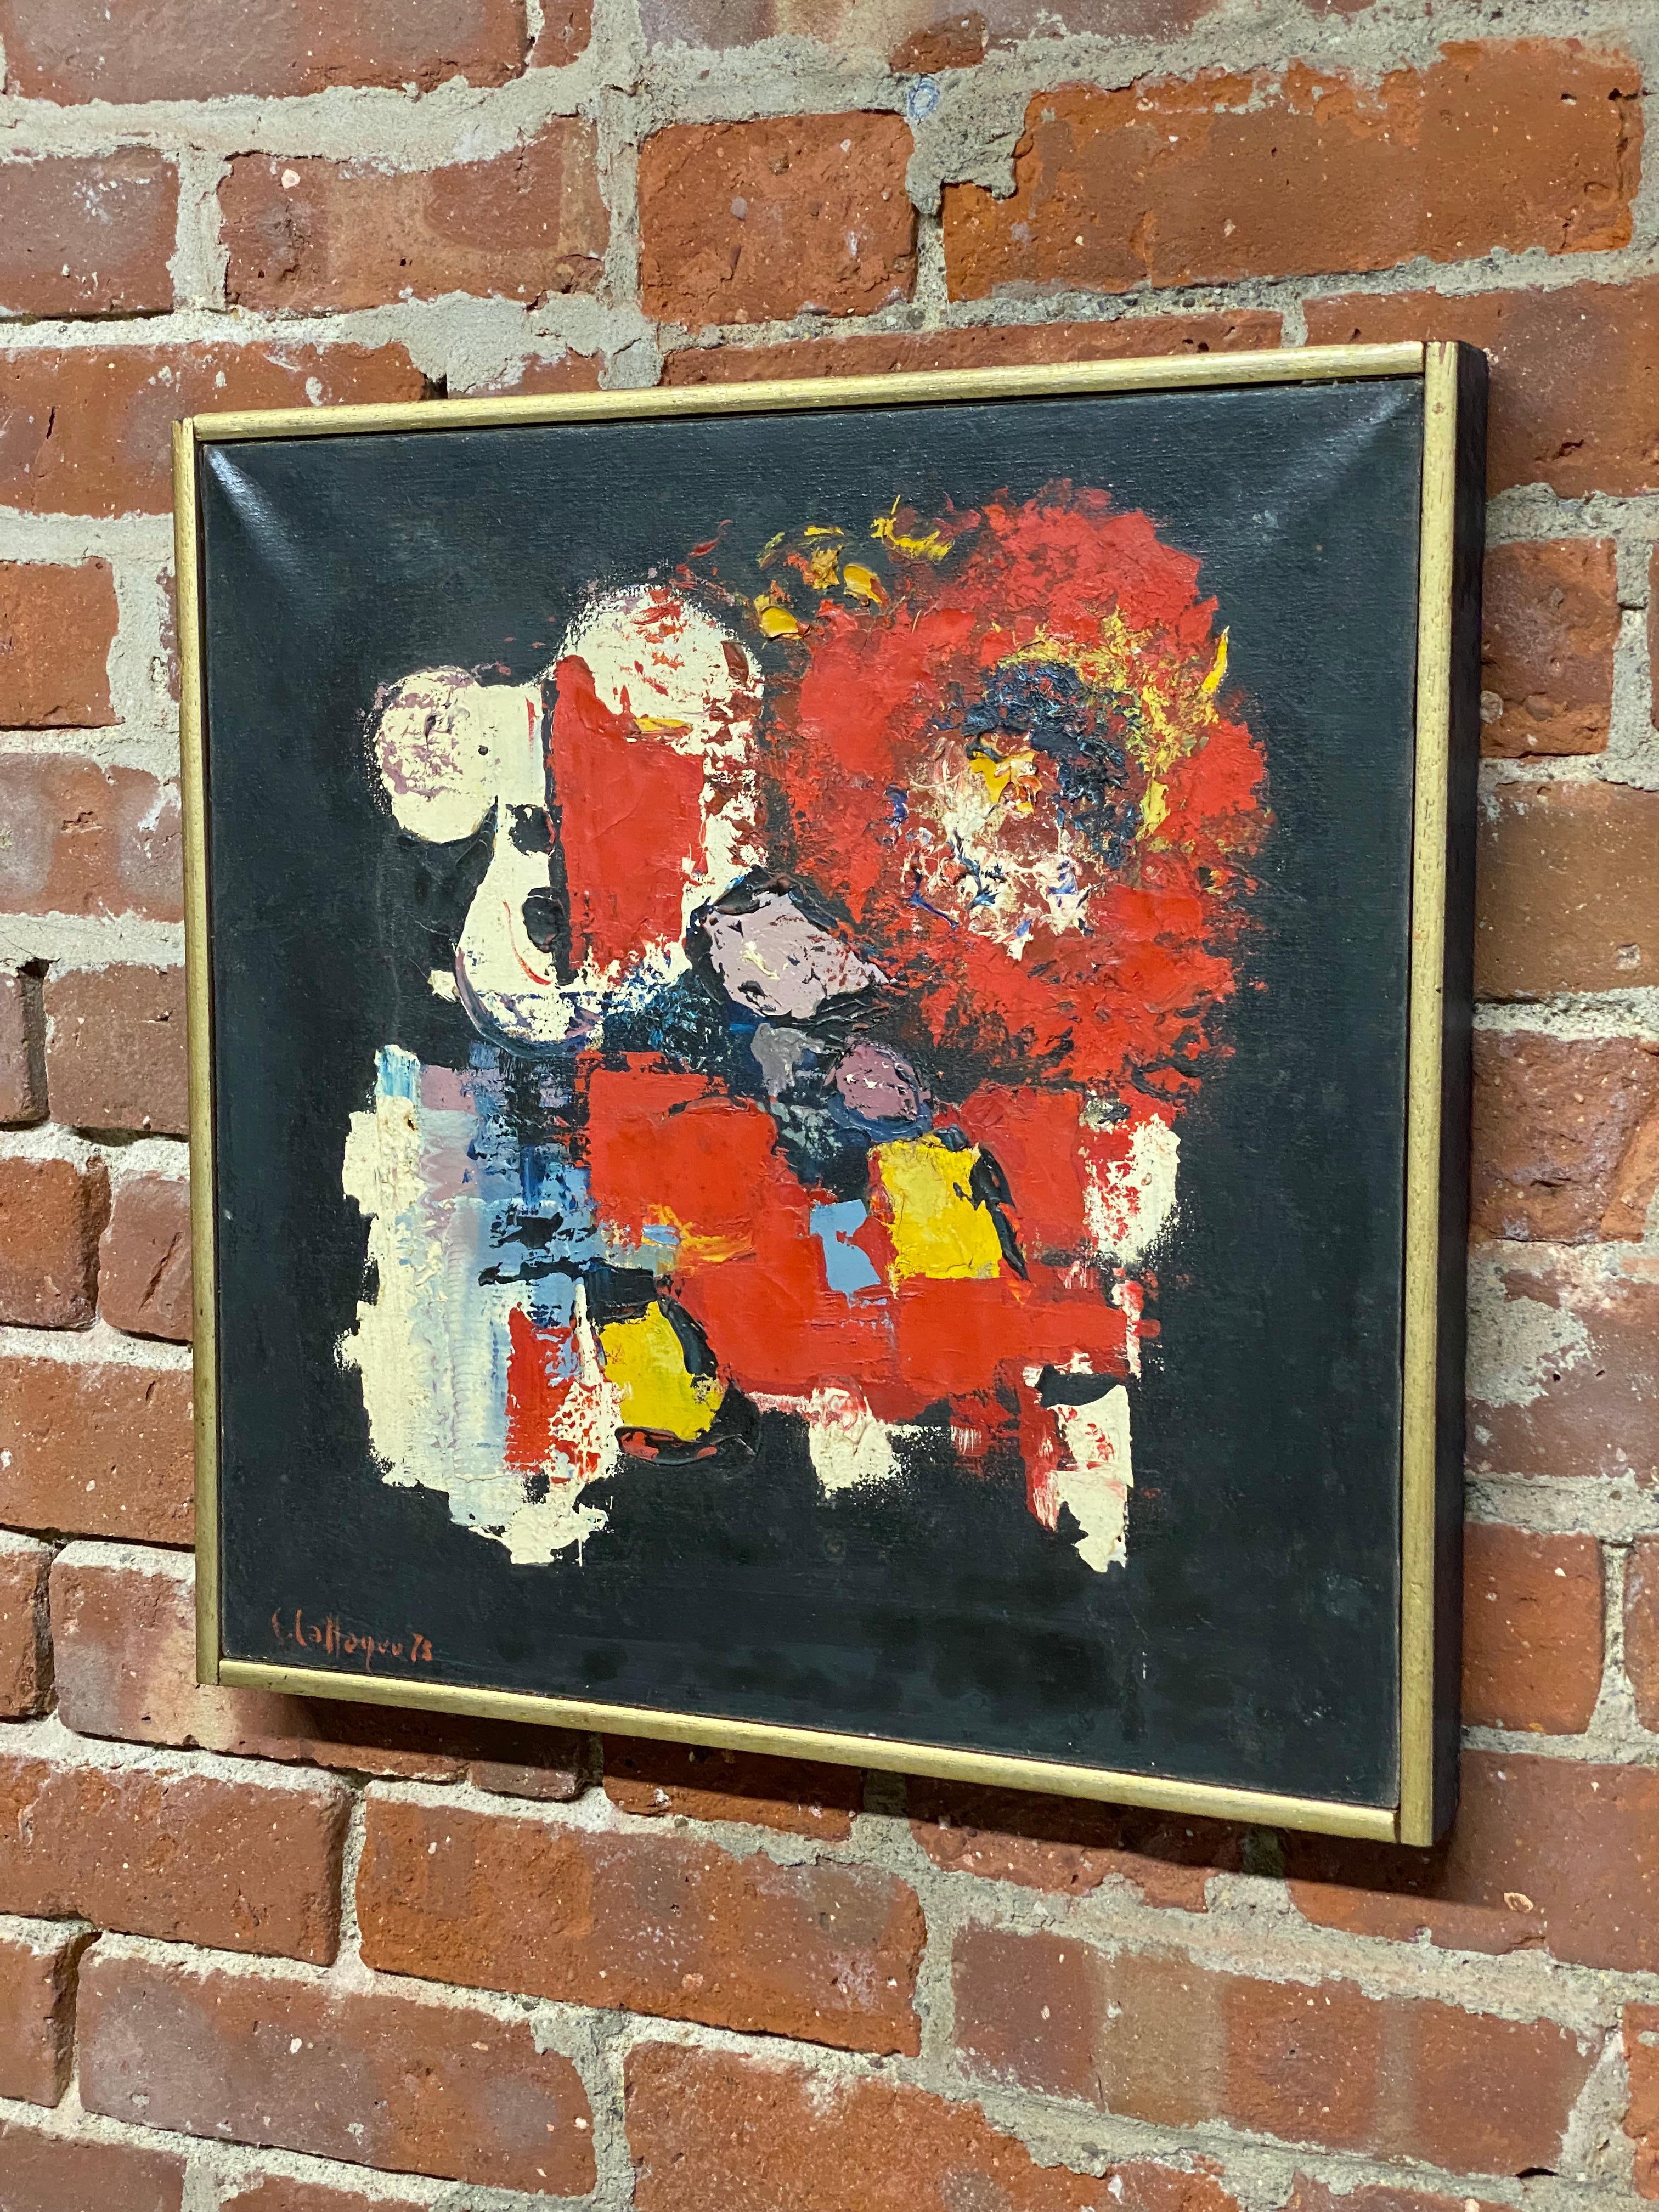 Signed and dated expressionistic abstract painting on canvas. Oil paint on canvas in a black and gold profile wood molding frame. Signed and dated, C Cattaneo, '73 (Carlo Cattaneo). There is also a notation on the reverse either from a Scarsdale, NY